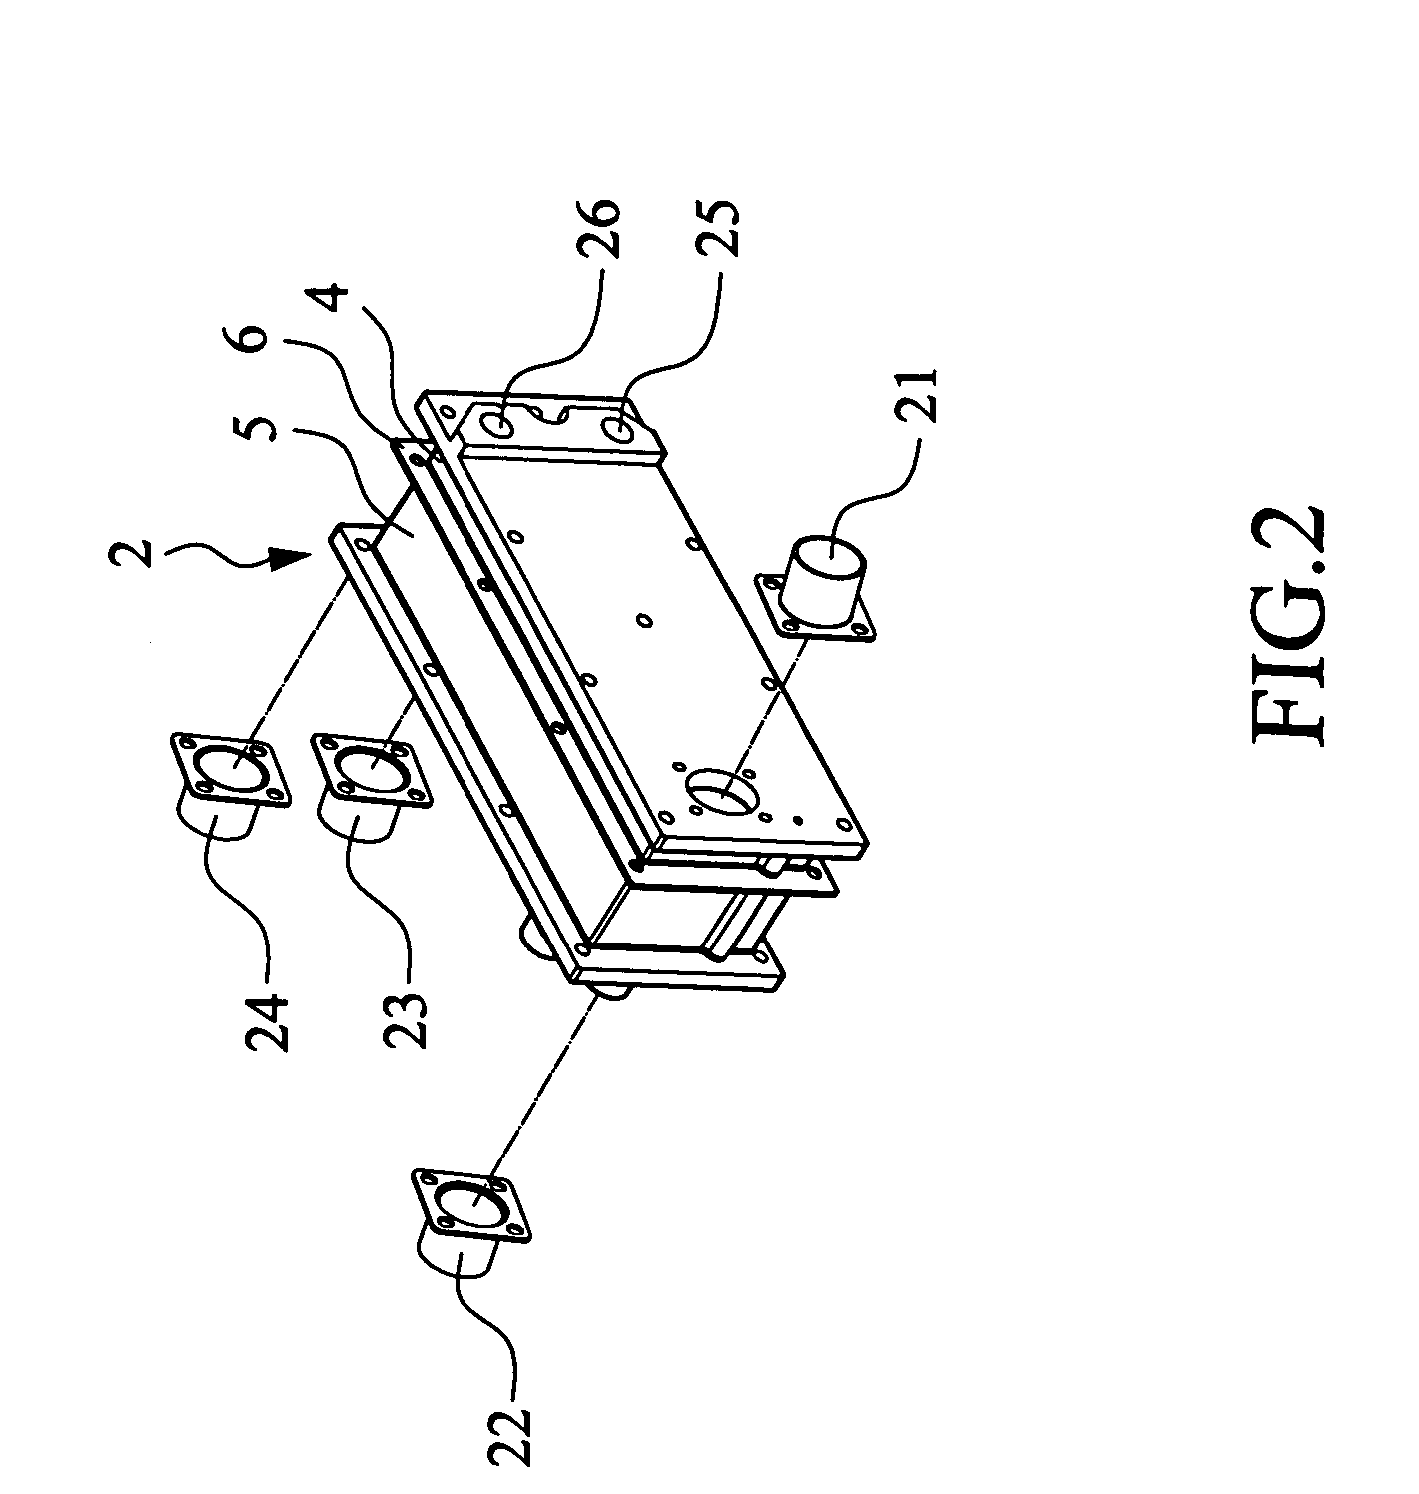 Reaction gas temperature and humidity regulating module for fuel cell stack